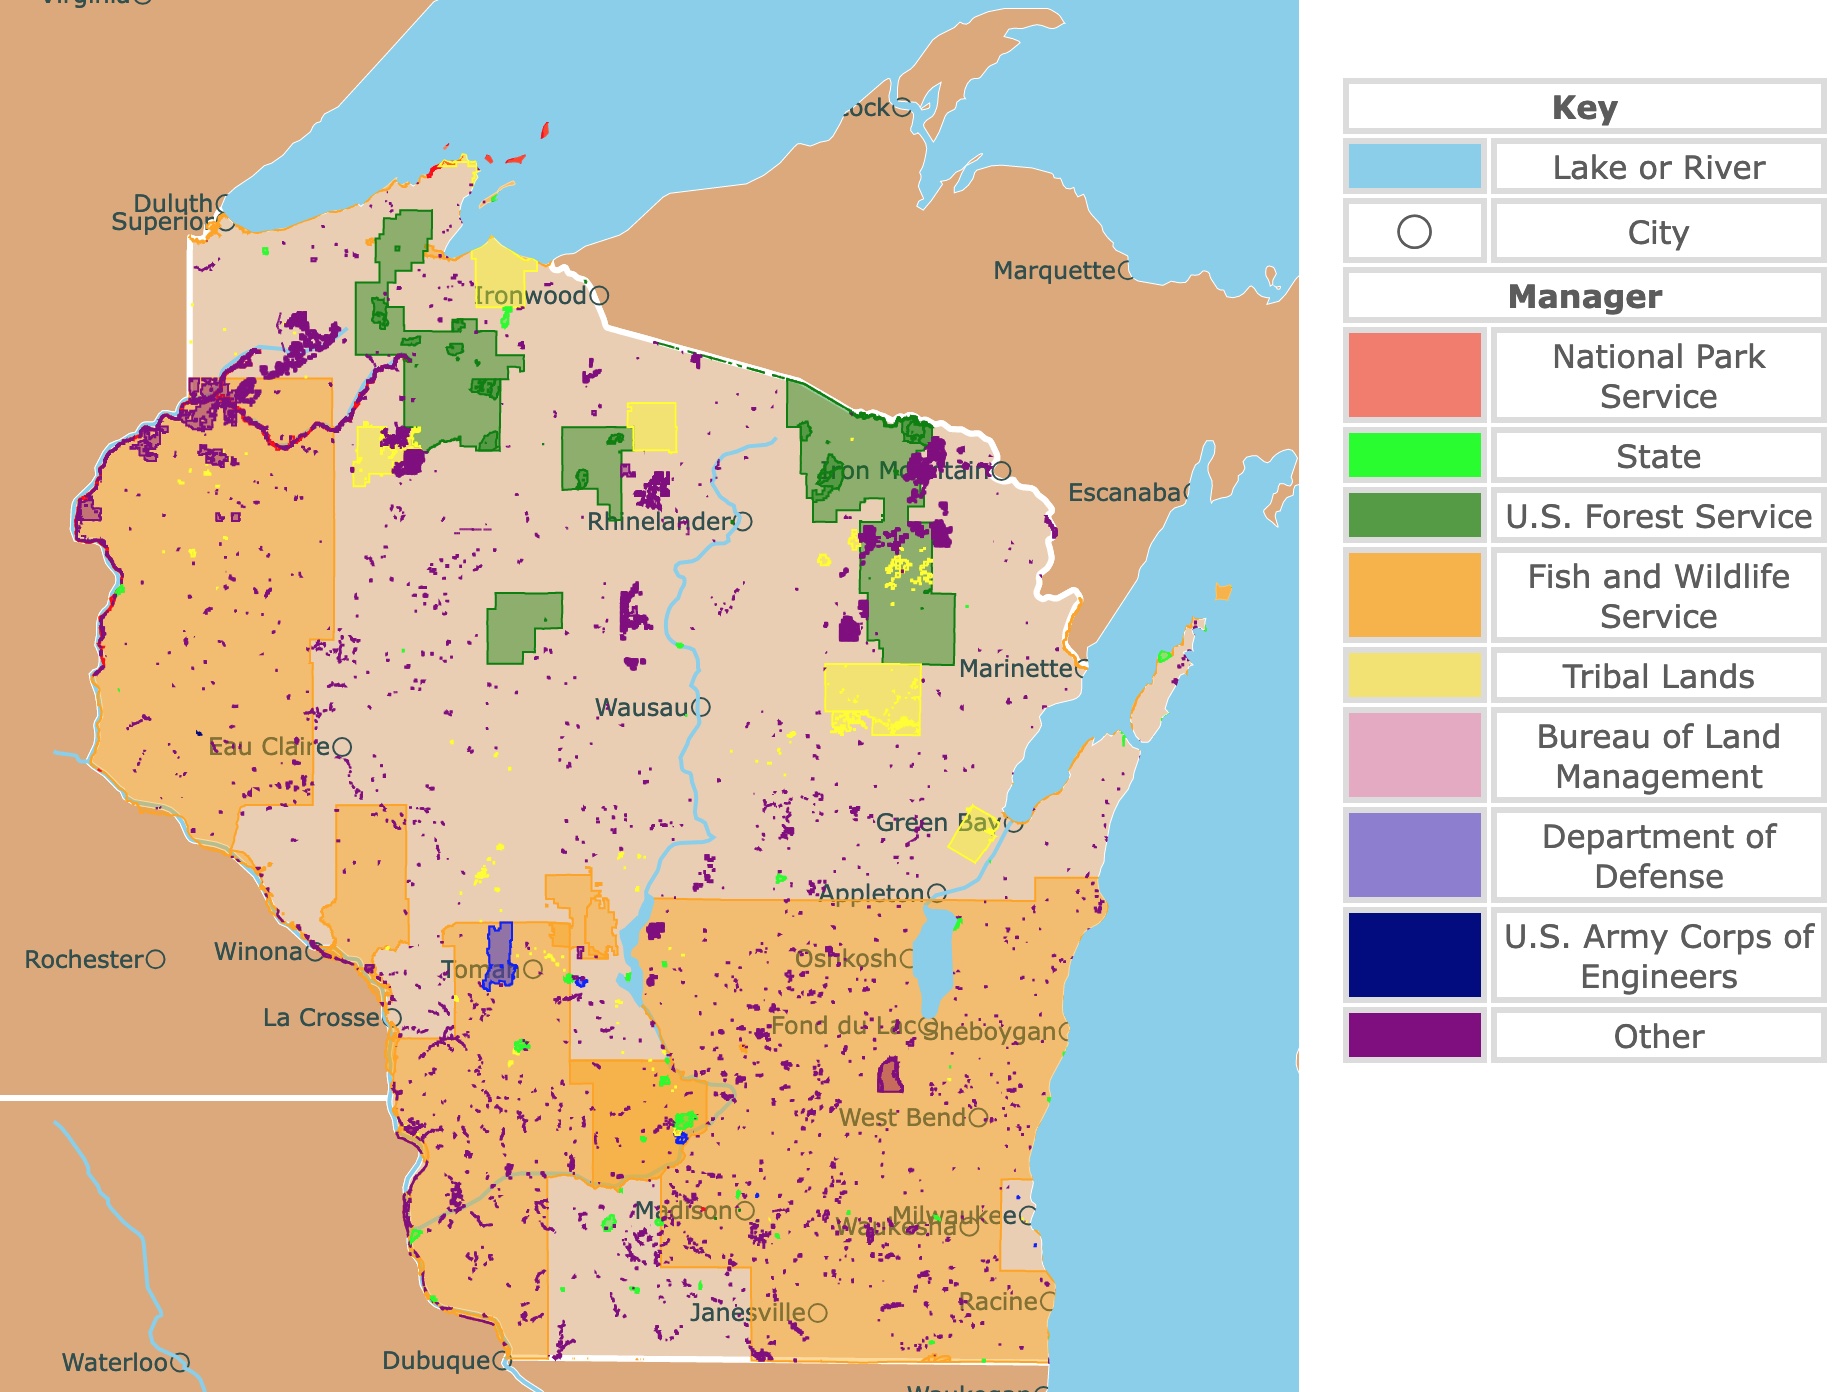 Map of wisconsin's state parks, national parks, forests, and public lands areas